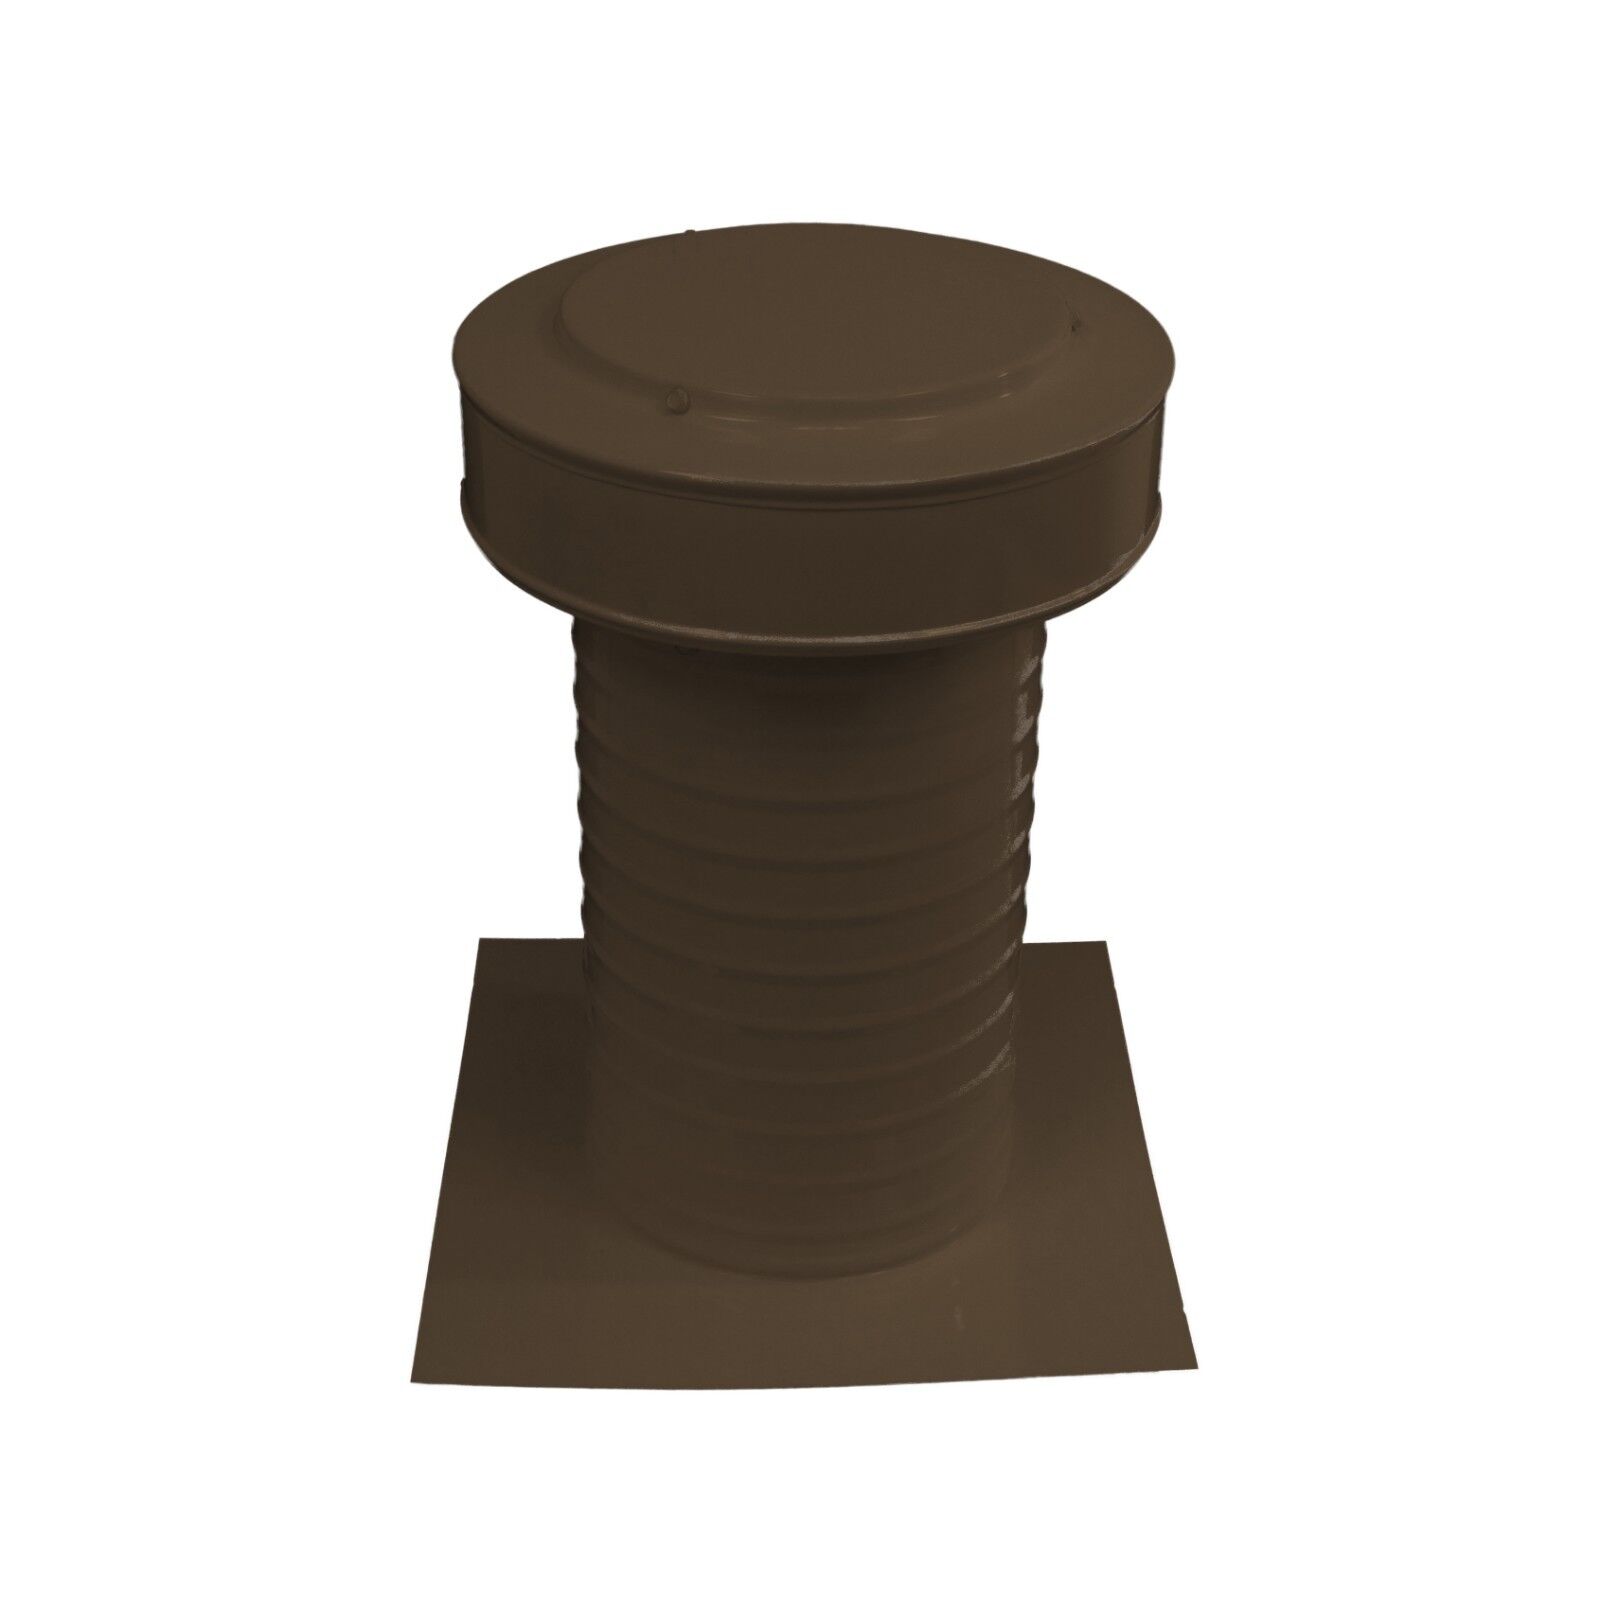 7 Inch Diameter Keepa Vent An Aluminum Roof Vent For Flat Roofs In Brown